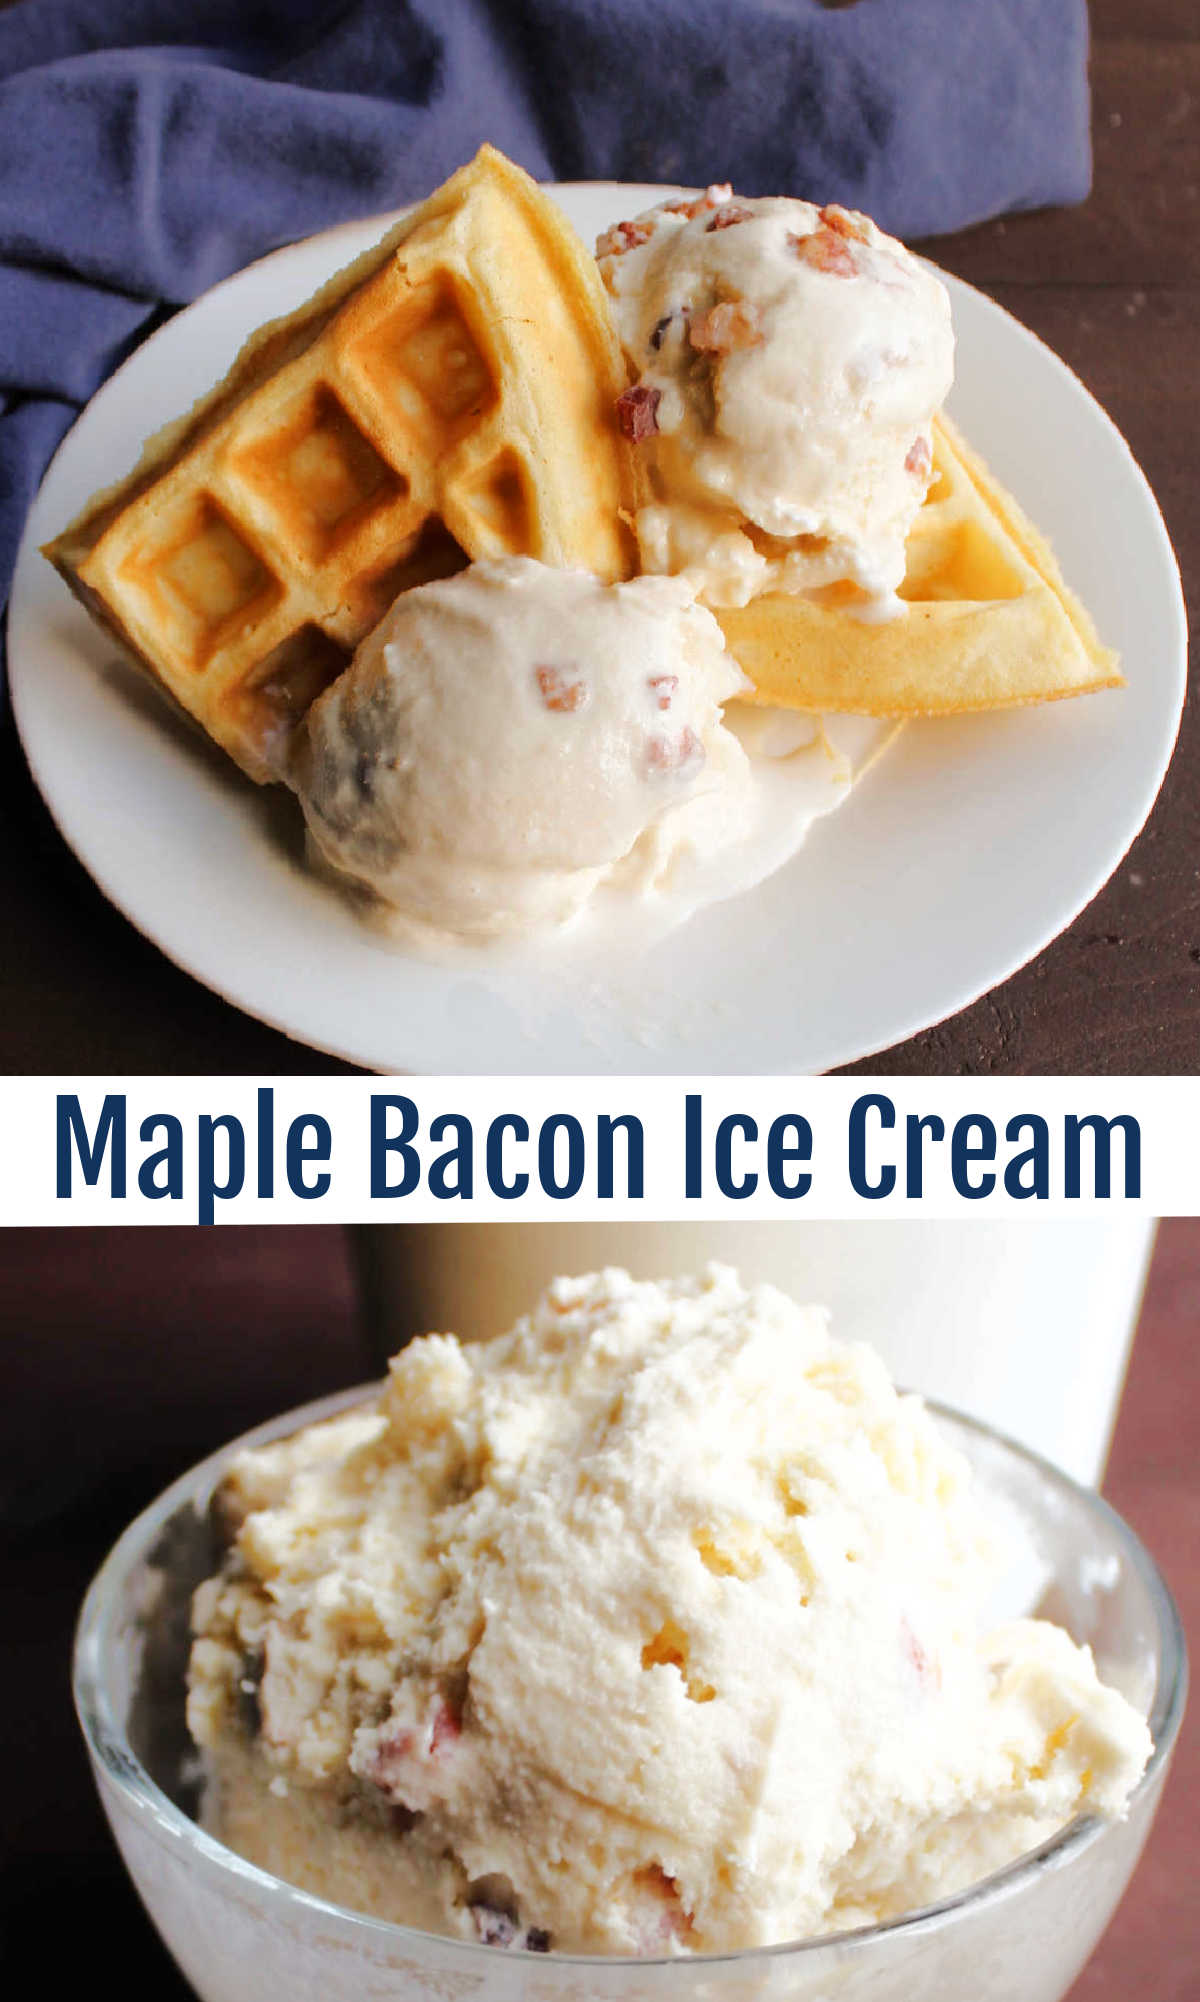 Fresh sweet maple syrup and salty savory bacon come together in this unique ice cream recipe. The combination really works to make a tasty frozen confection.